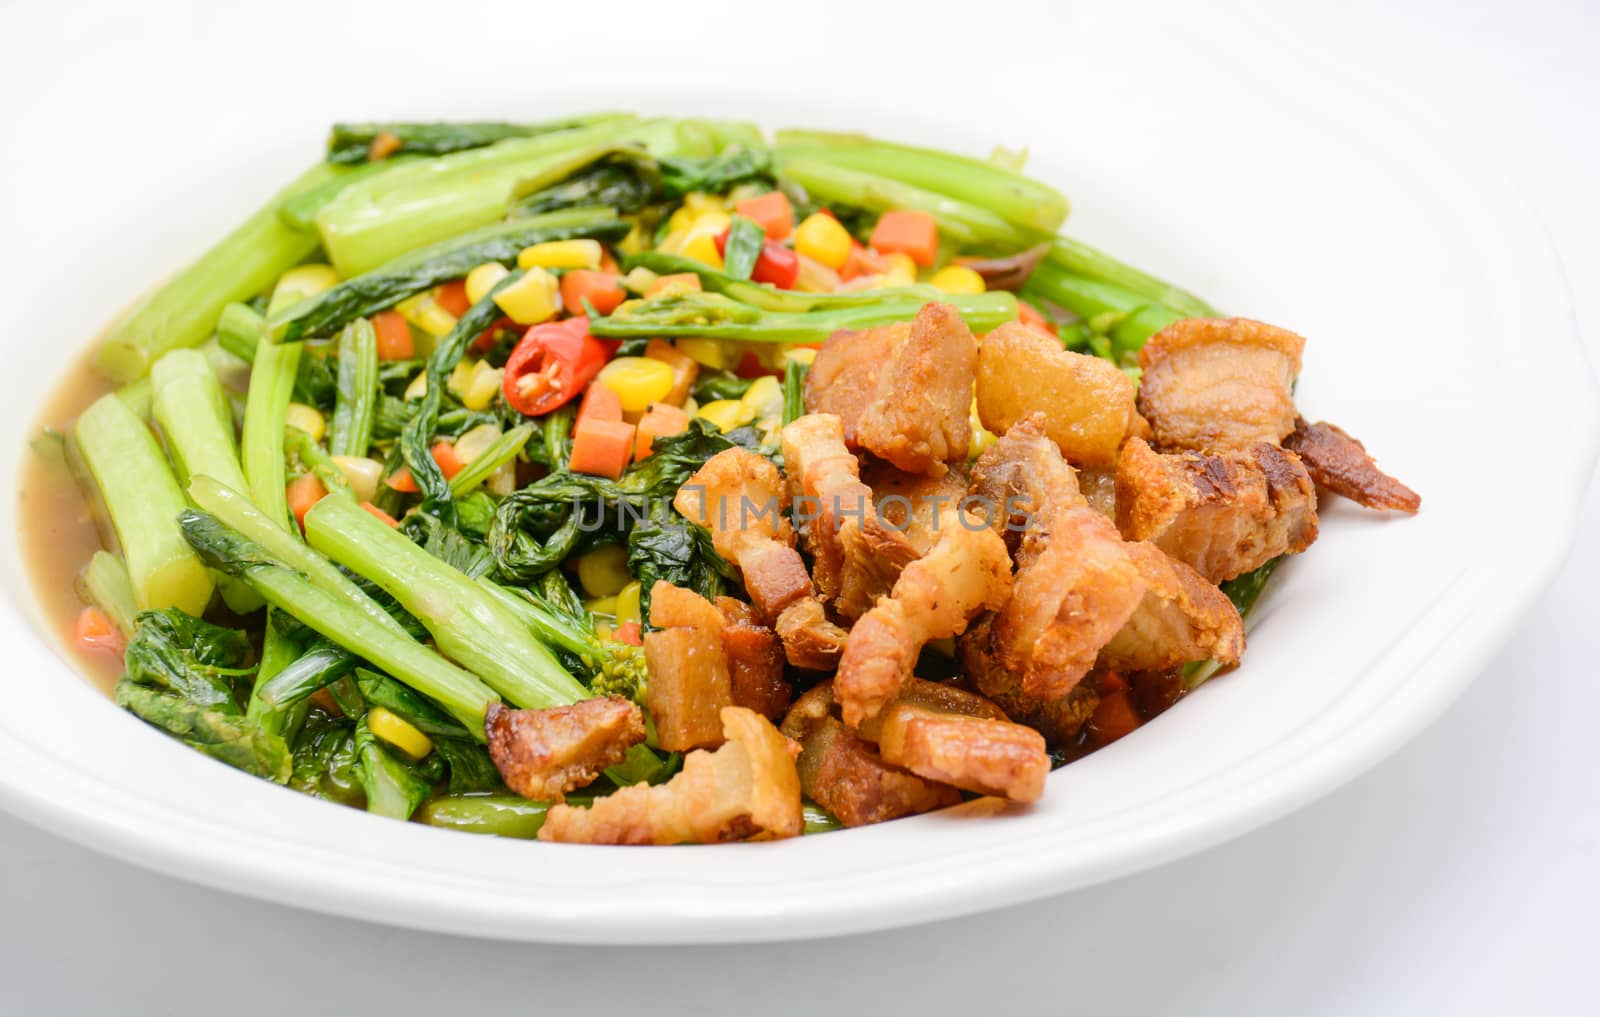 Stir fried Chinese kale with oyster sauce and pork